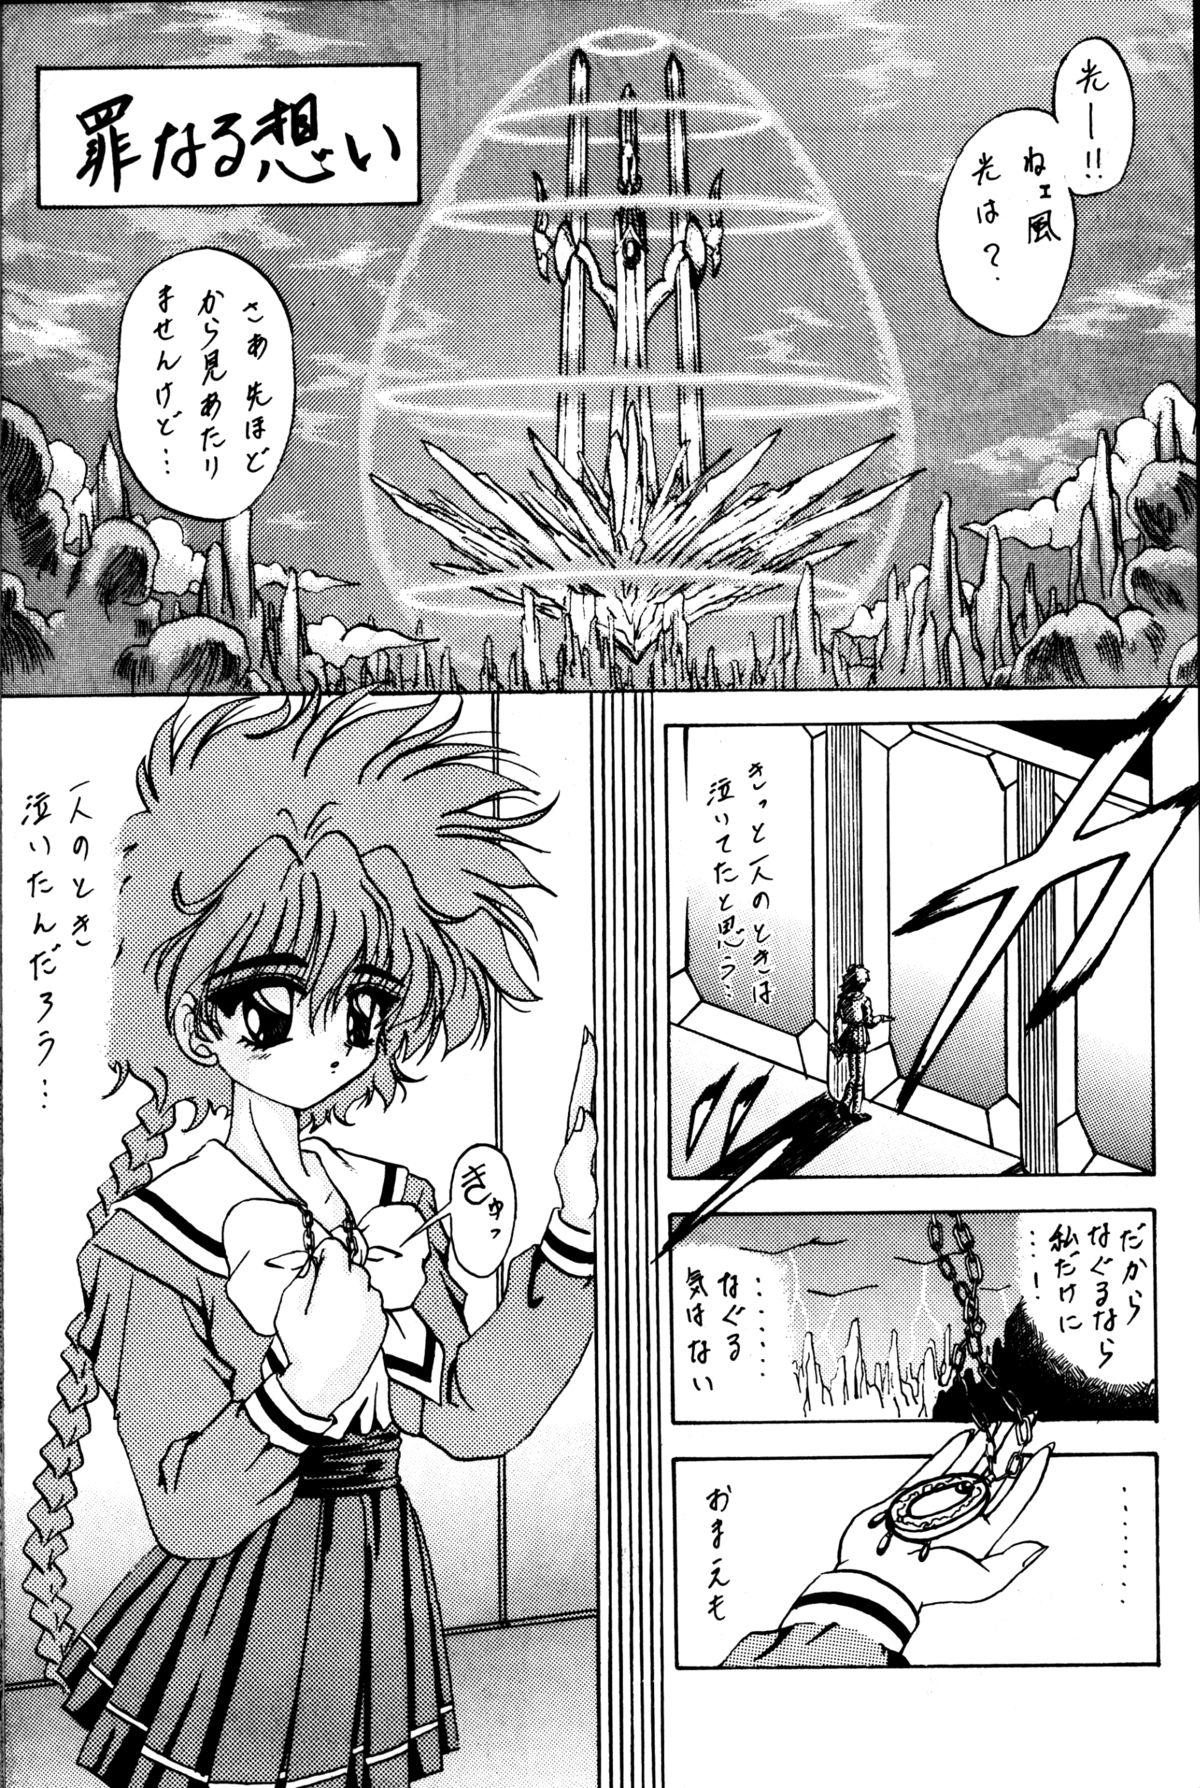 Ass Sex Stale World II - Magic knight rayearth Gay Public - Page 4